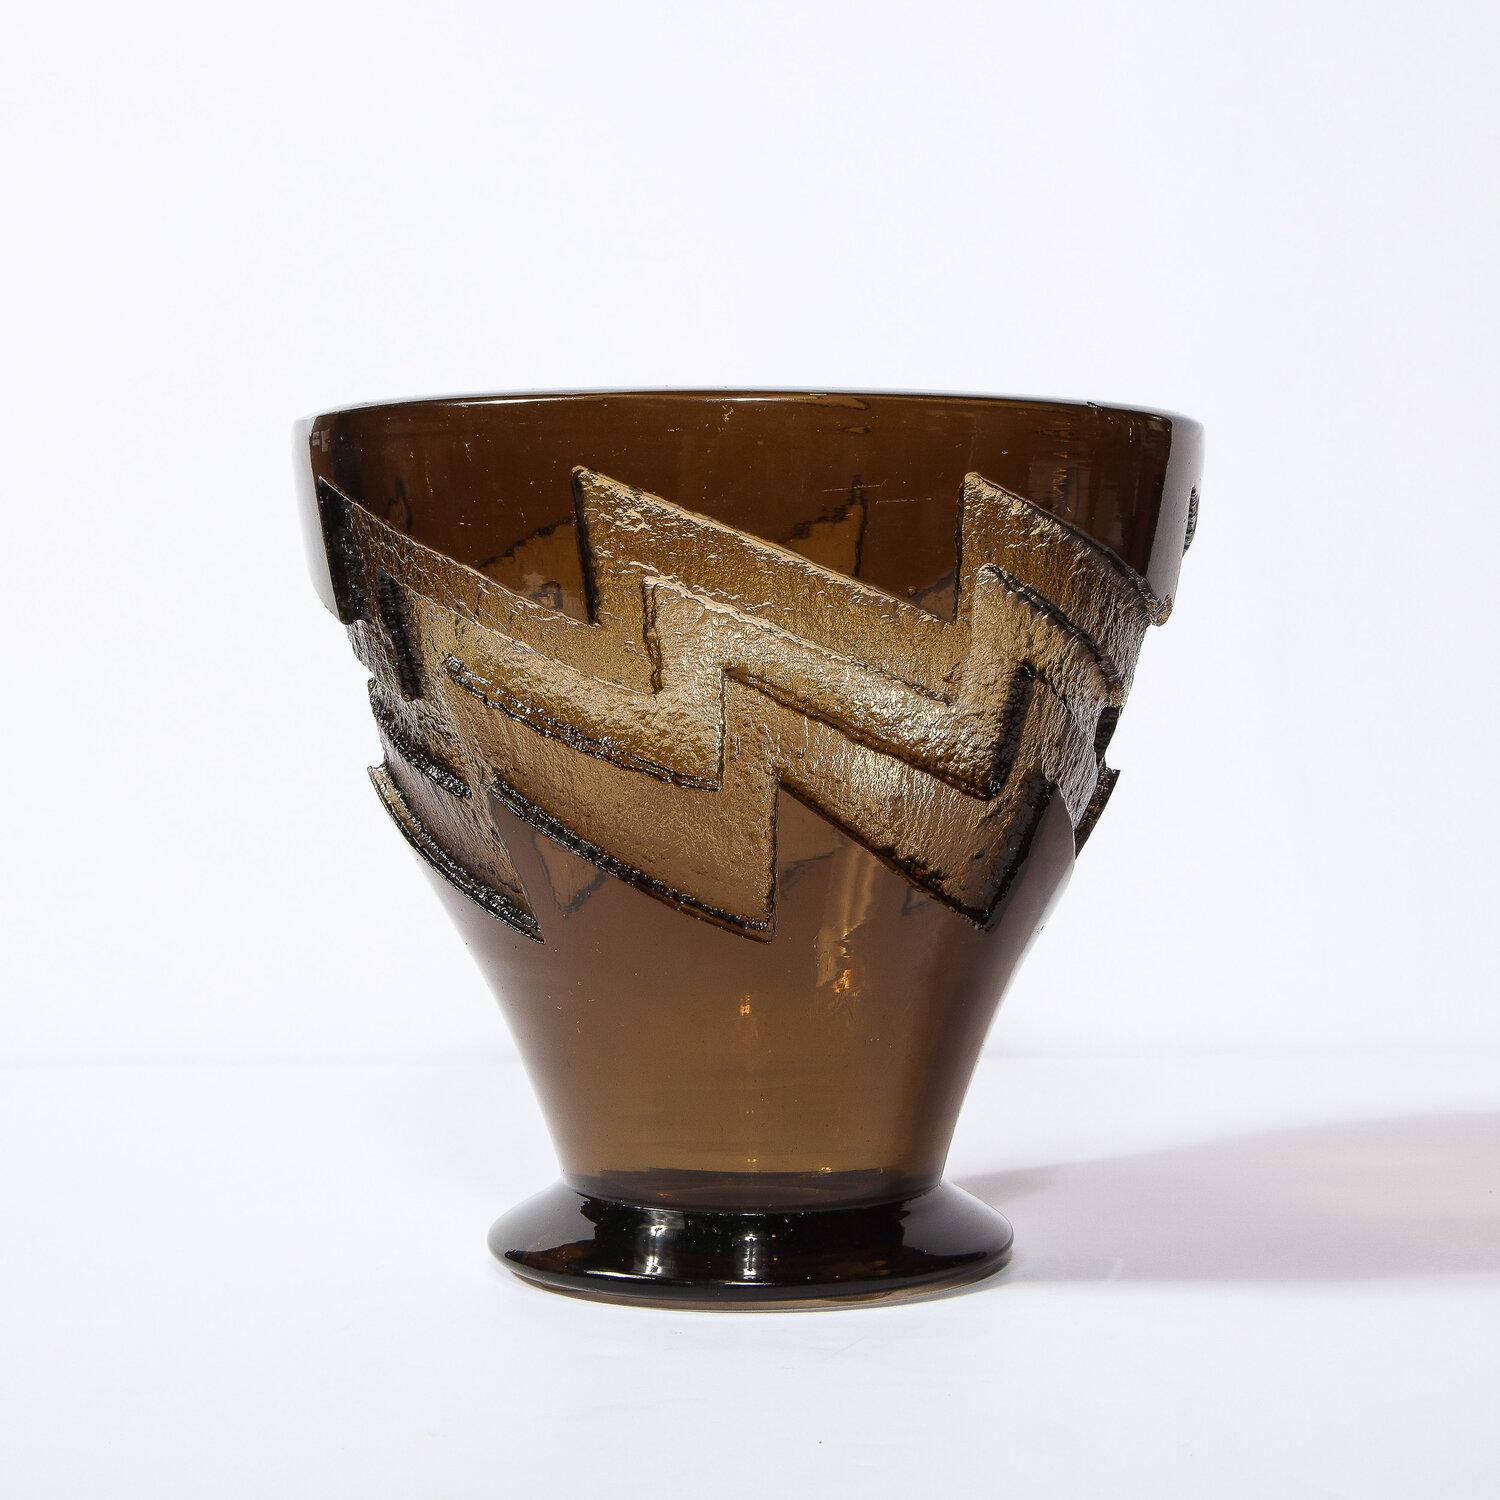 Art Deco Smoked Acid Etched Glass Vase with Zig Zag Motif Signed Daum Nancy In Excellent Condition For Sale In New York, NY